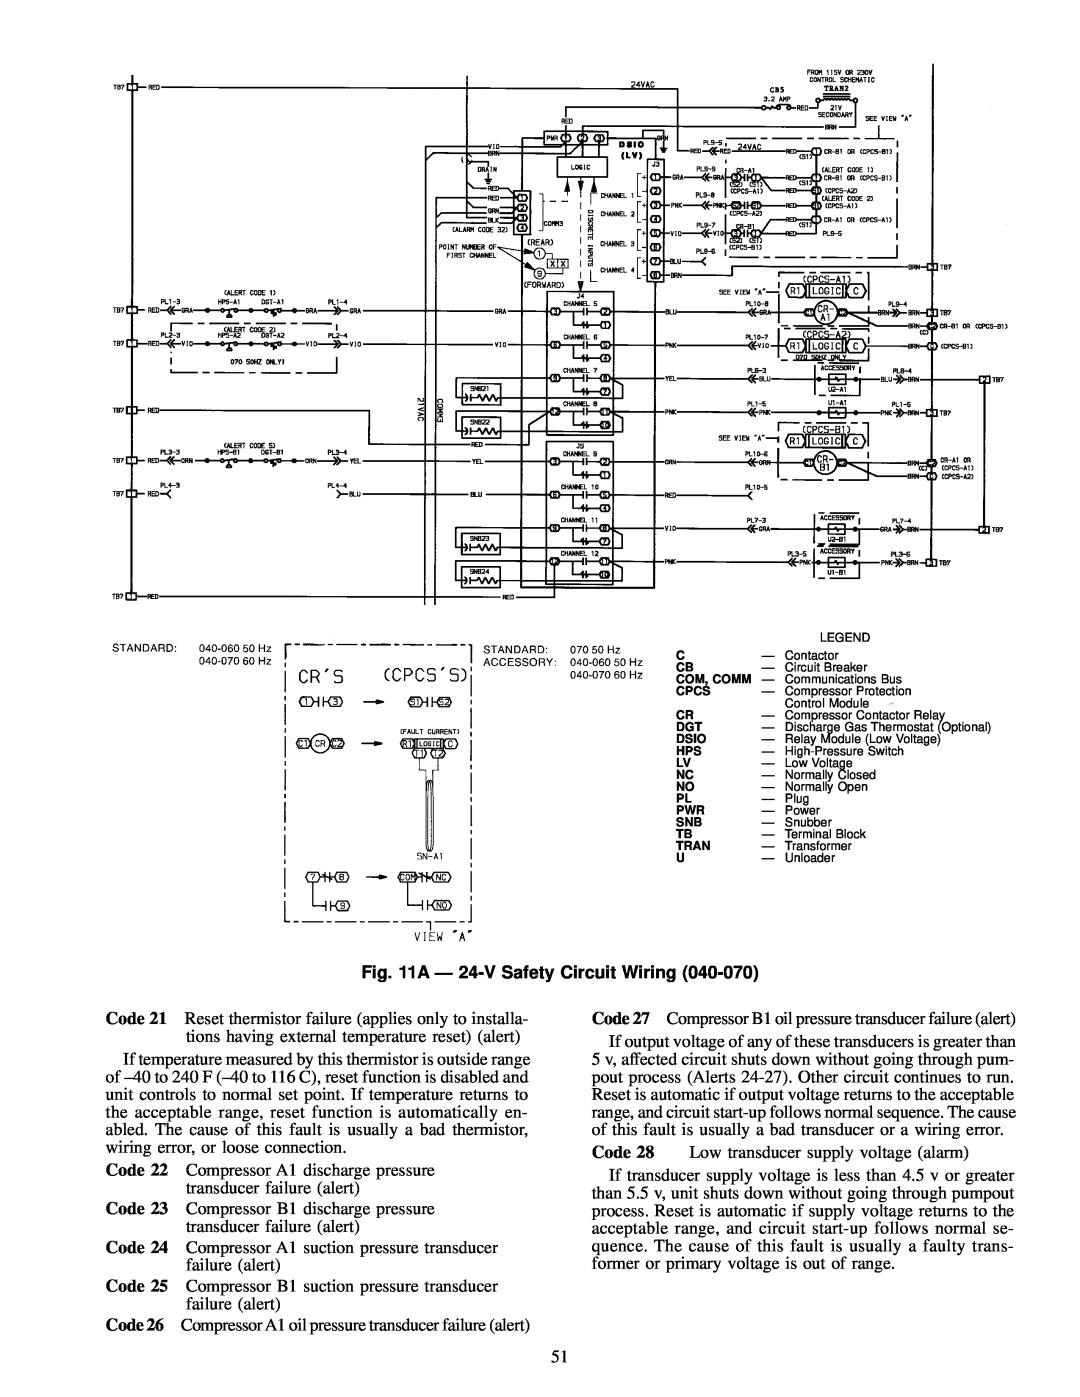 Carrier 30GN040-420 operating instructions A Ð 24-VSafety Circuit Wiring 